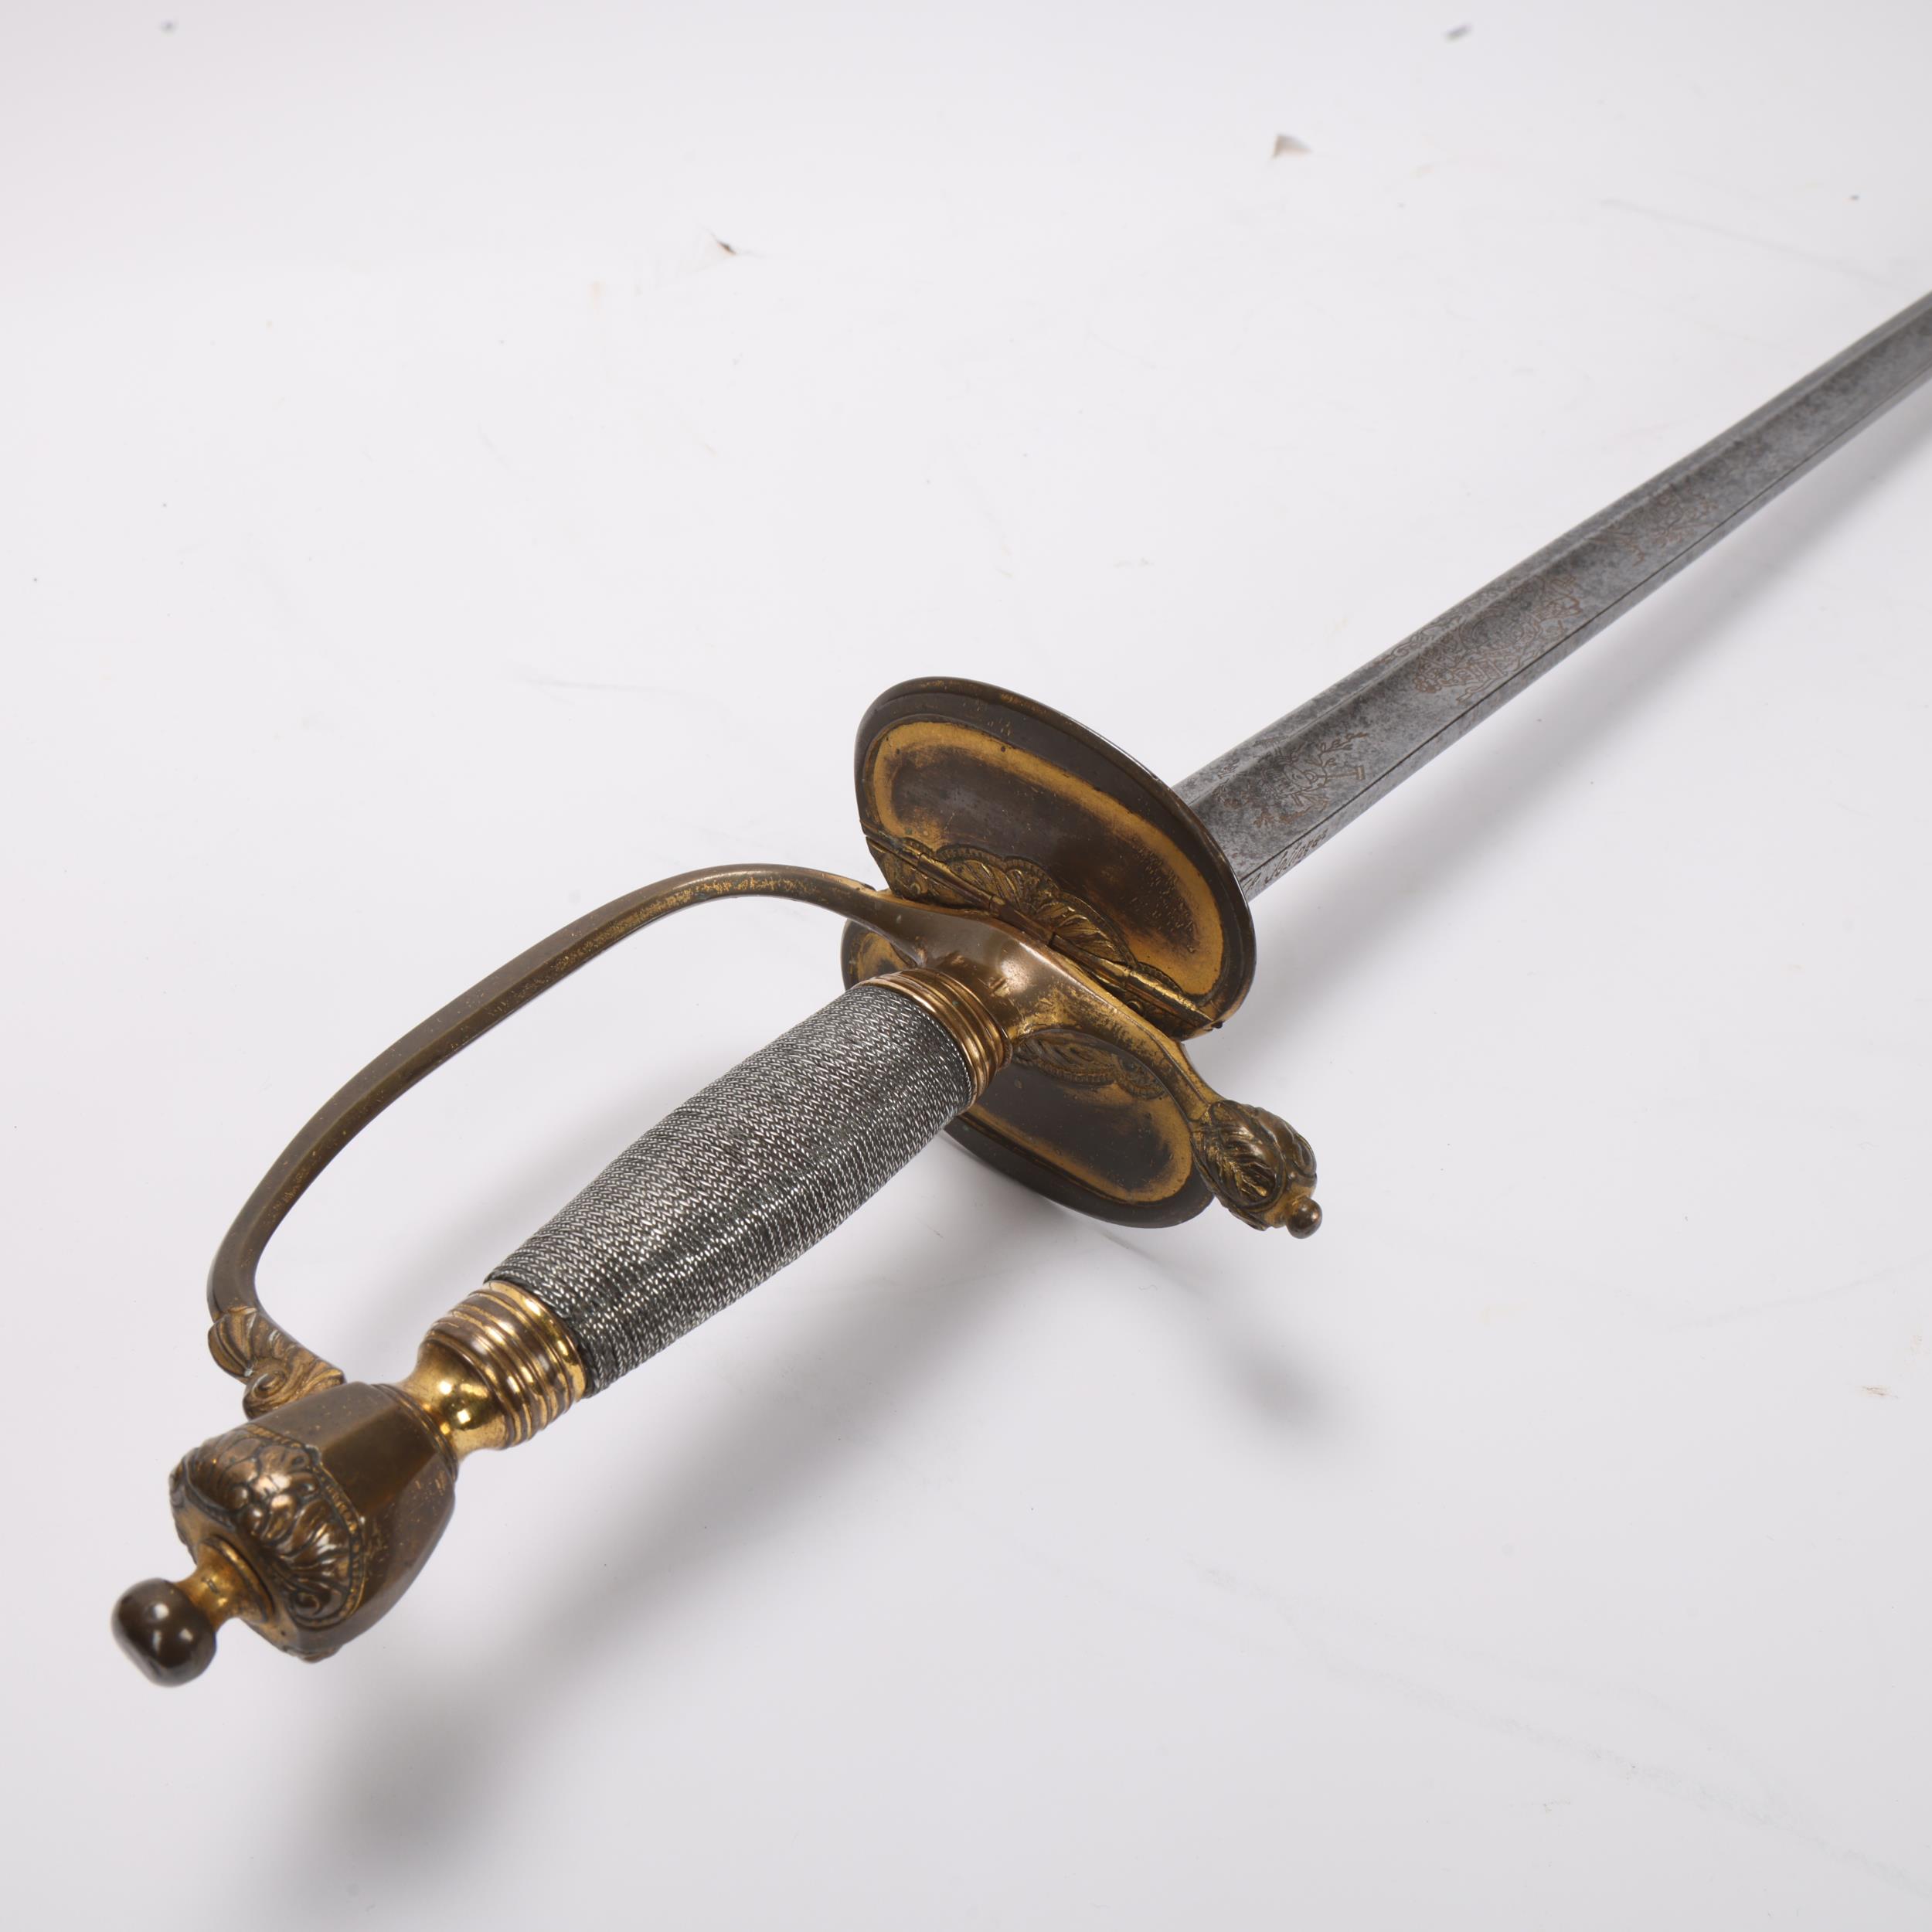 A Georgian sword with silver-bound gilt-brass hilt, folding guard and engraved blade with GR cipher, - Image 3 of 3